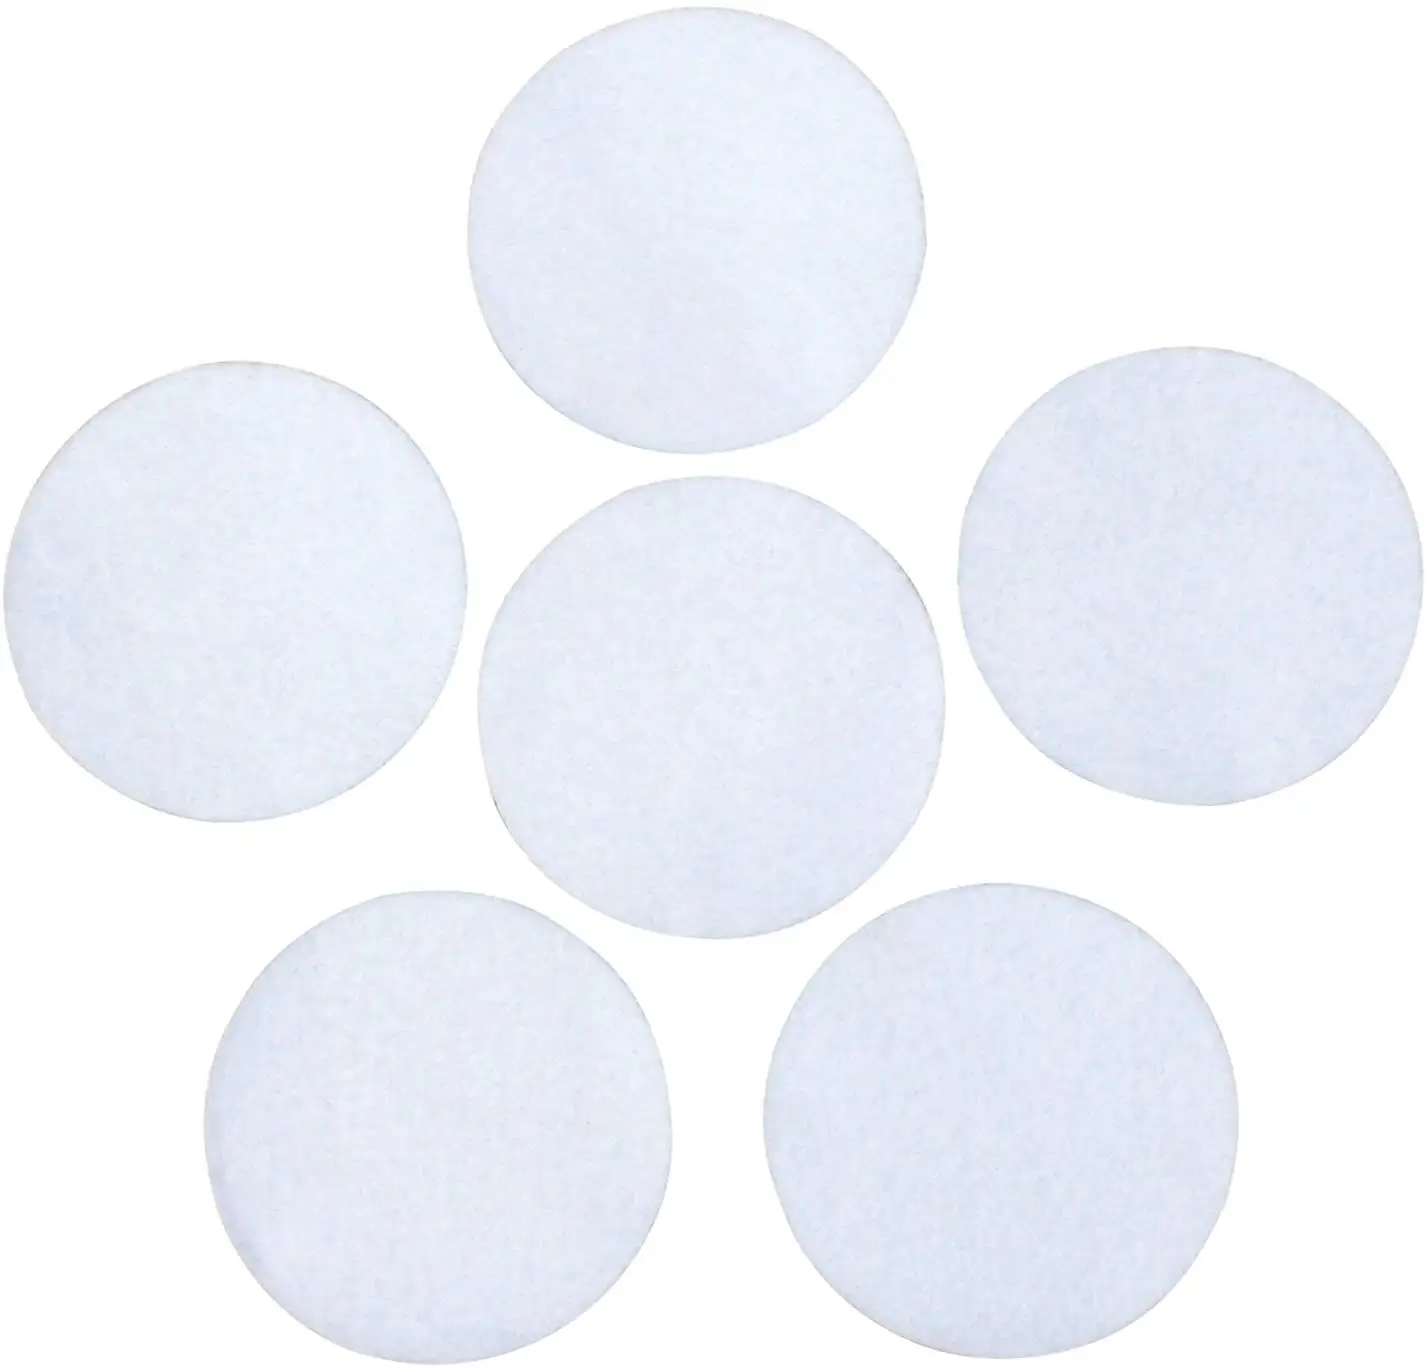 Wholesale cheap die cut self adhesive black white wool felt circles for arts and crafts patchwork children felt craft kits